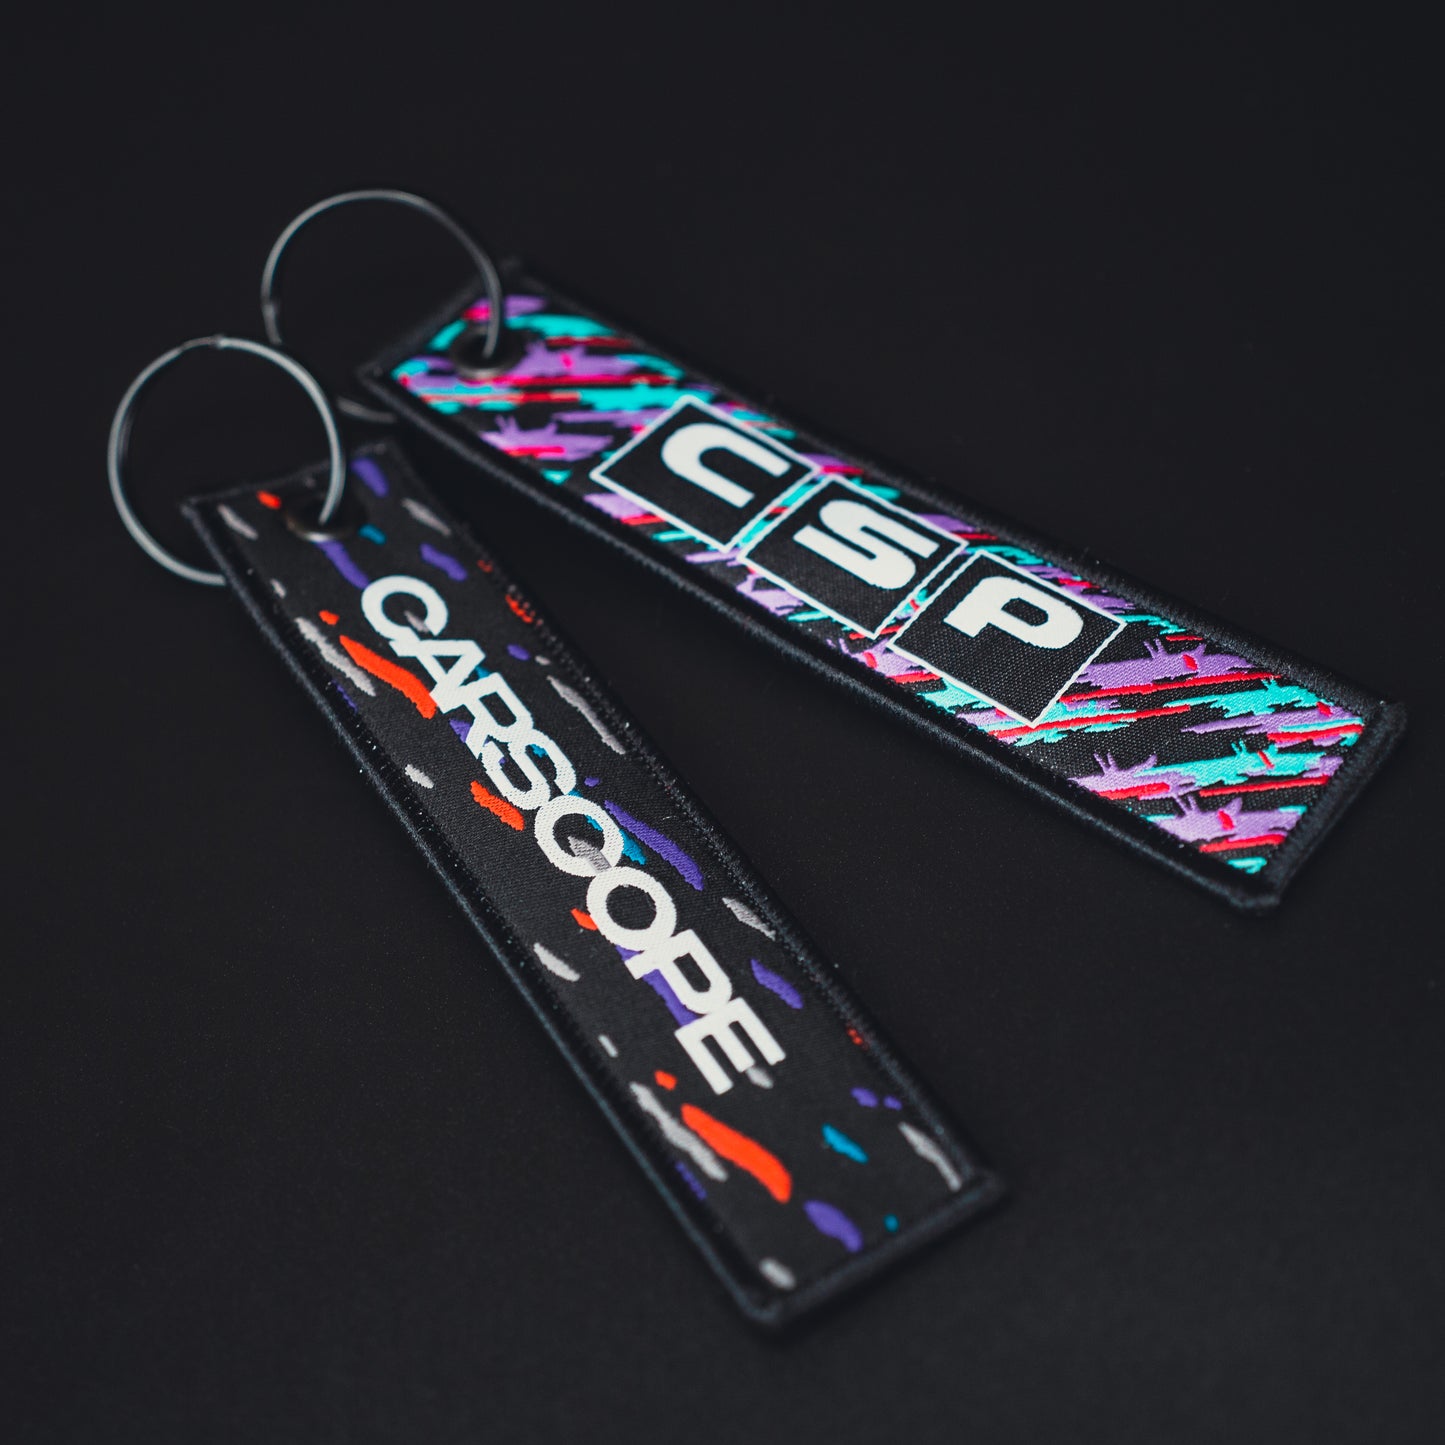 Boosted Key Ring